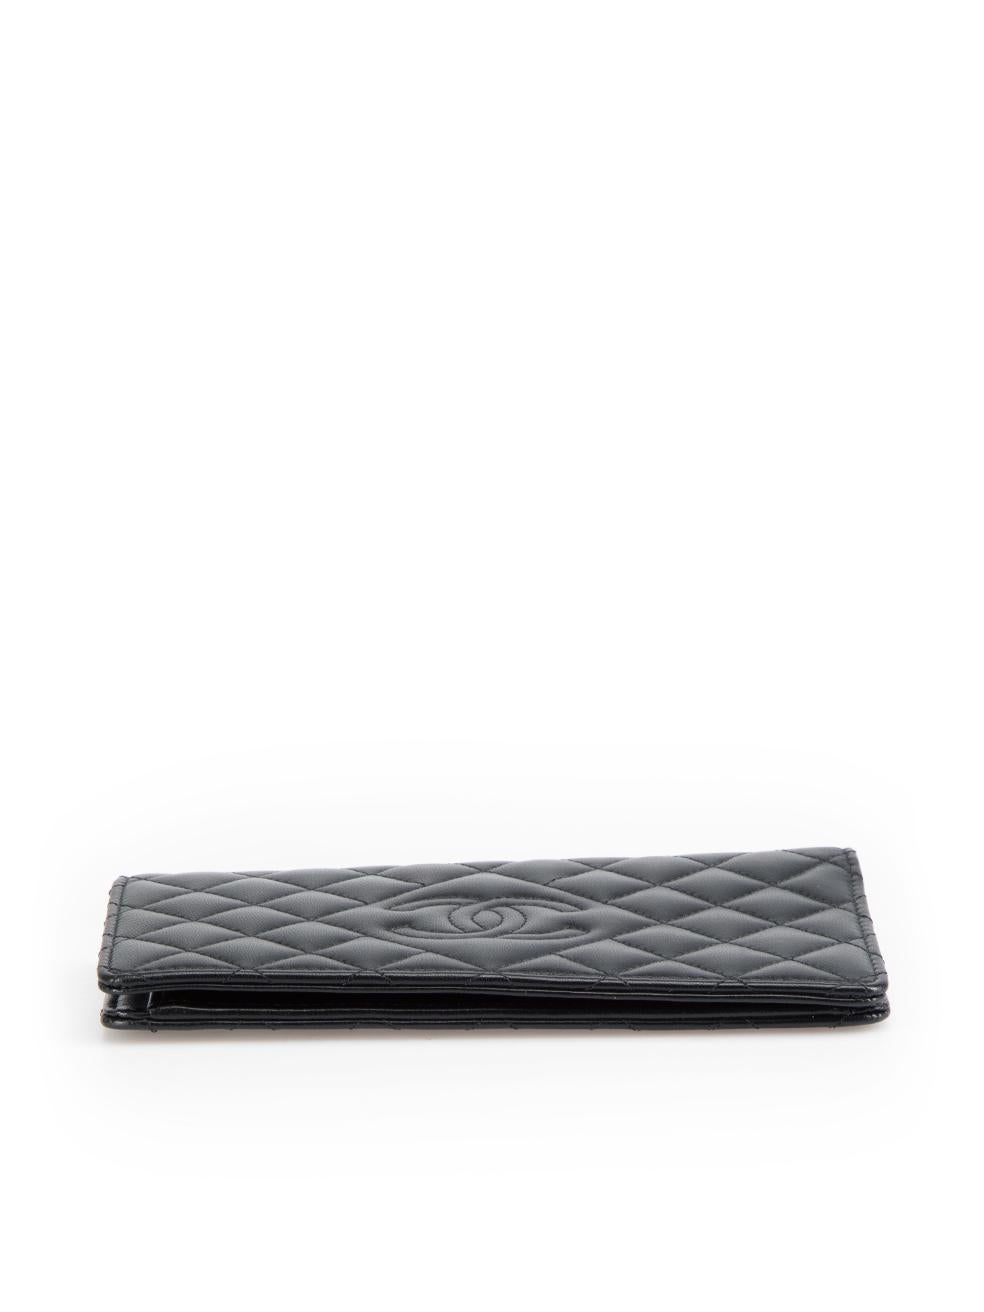 Women's Chanel Black Leather CC Quilted Bilfold Wallet